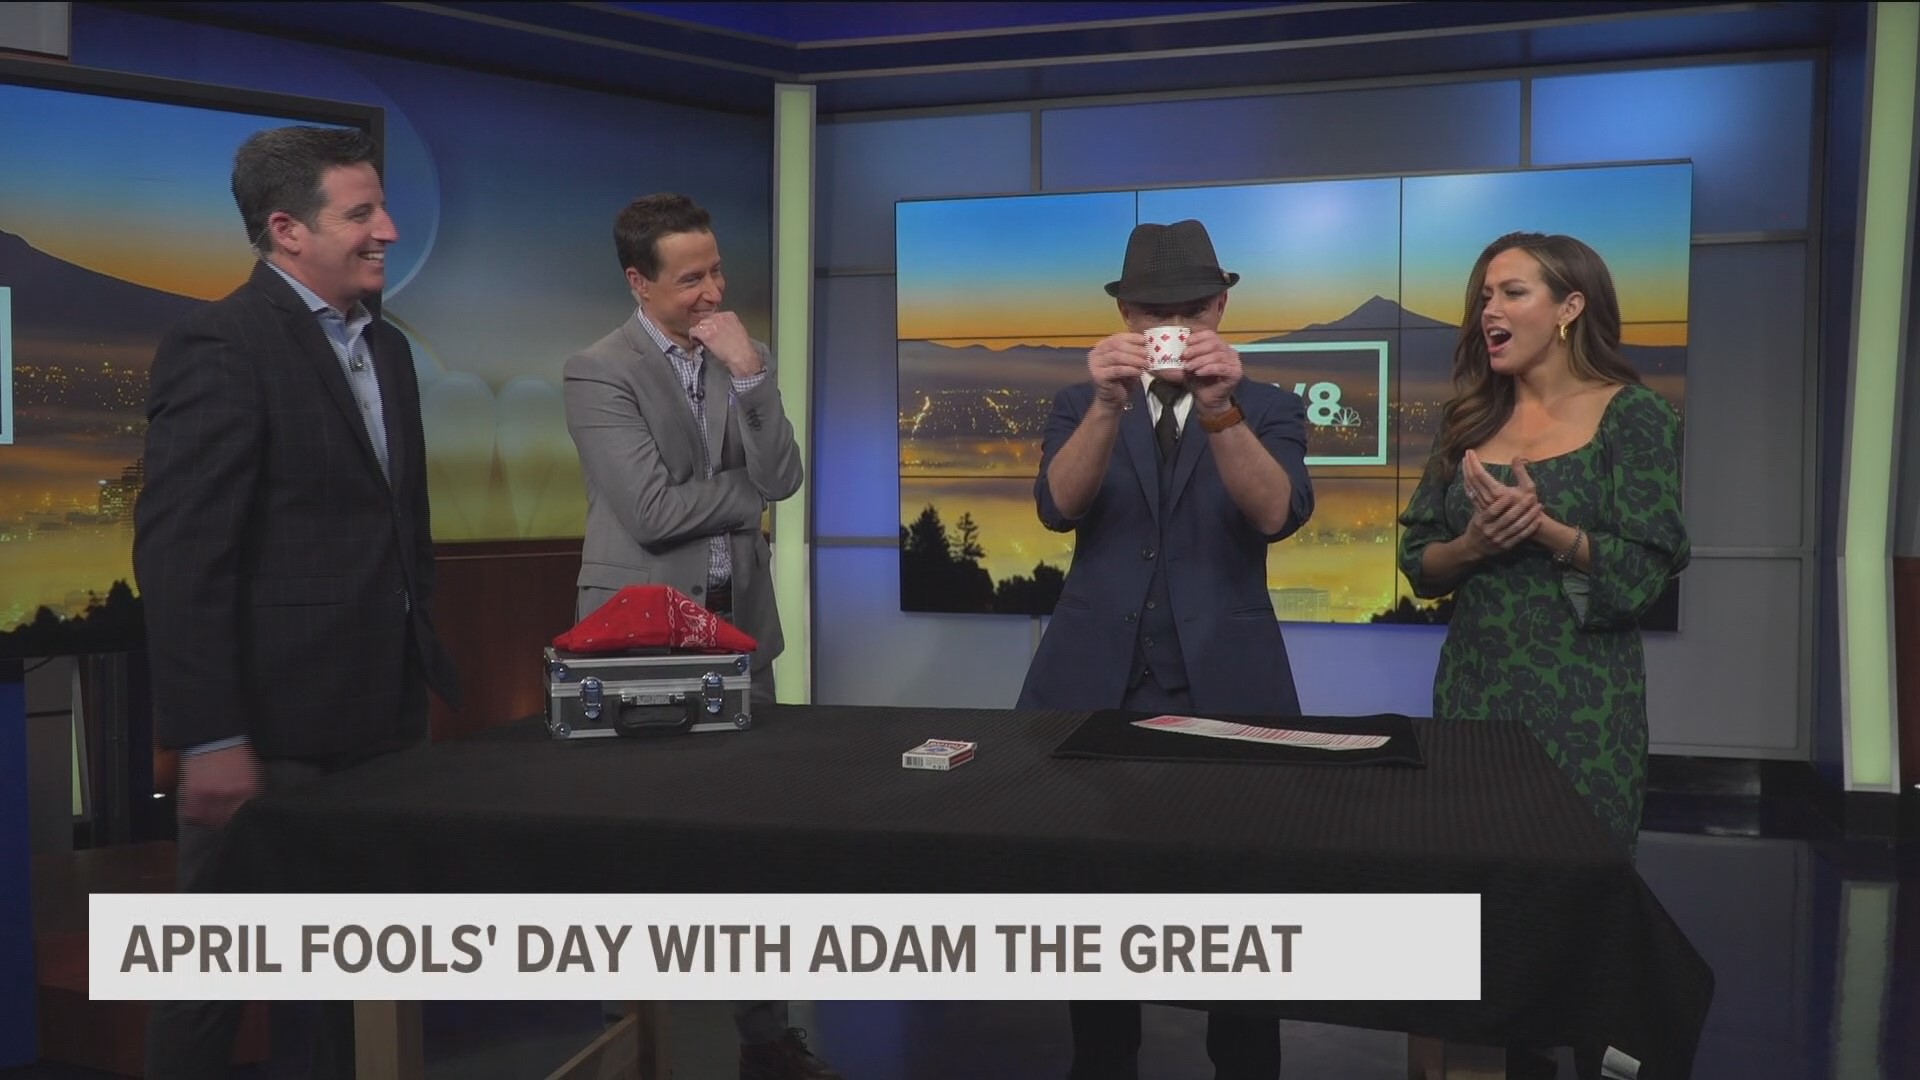 Adam the Great visits the KGW Studio to fool the Sunrise team with some April Fools' Day magic.